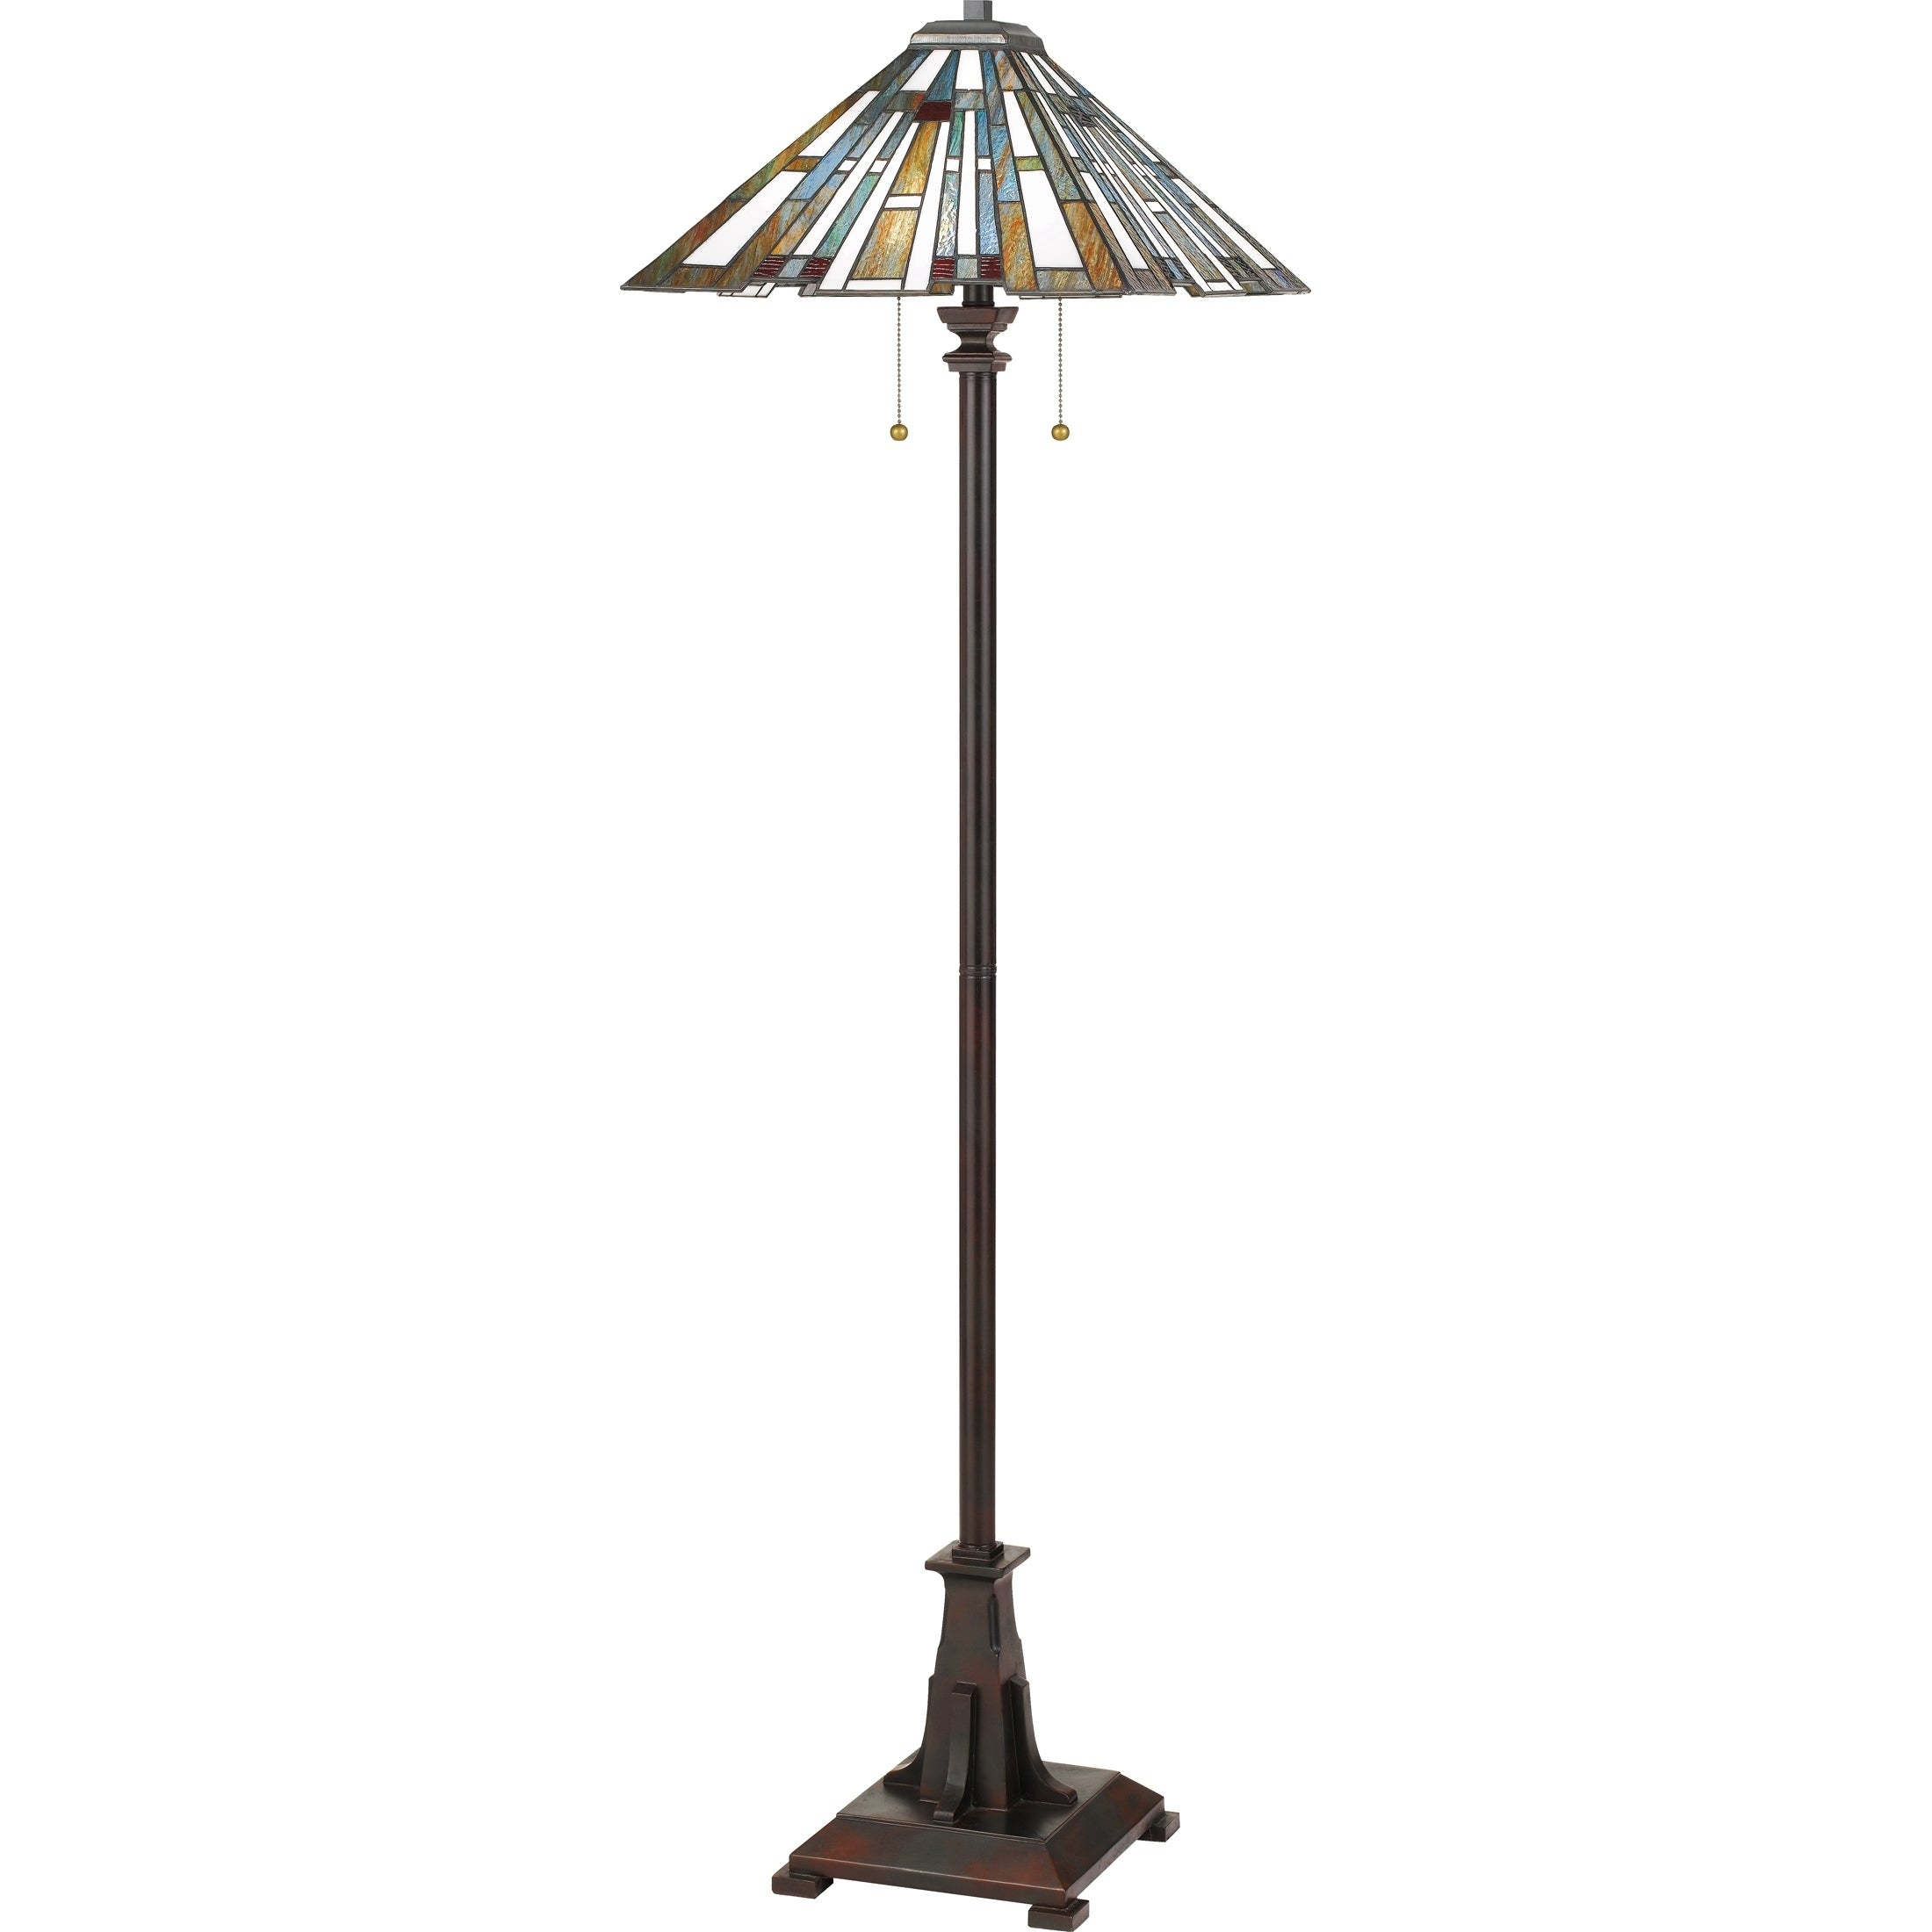 Quoizel Maybeck Valiant Bronze 2 Light Tiffany Floor Lamp with regard to proportions 2200 X 2200